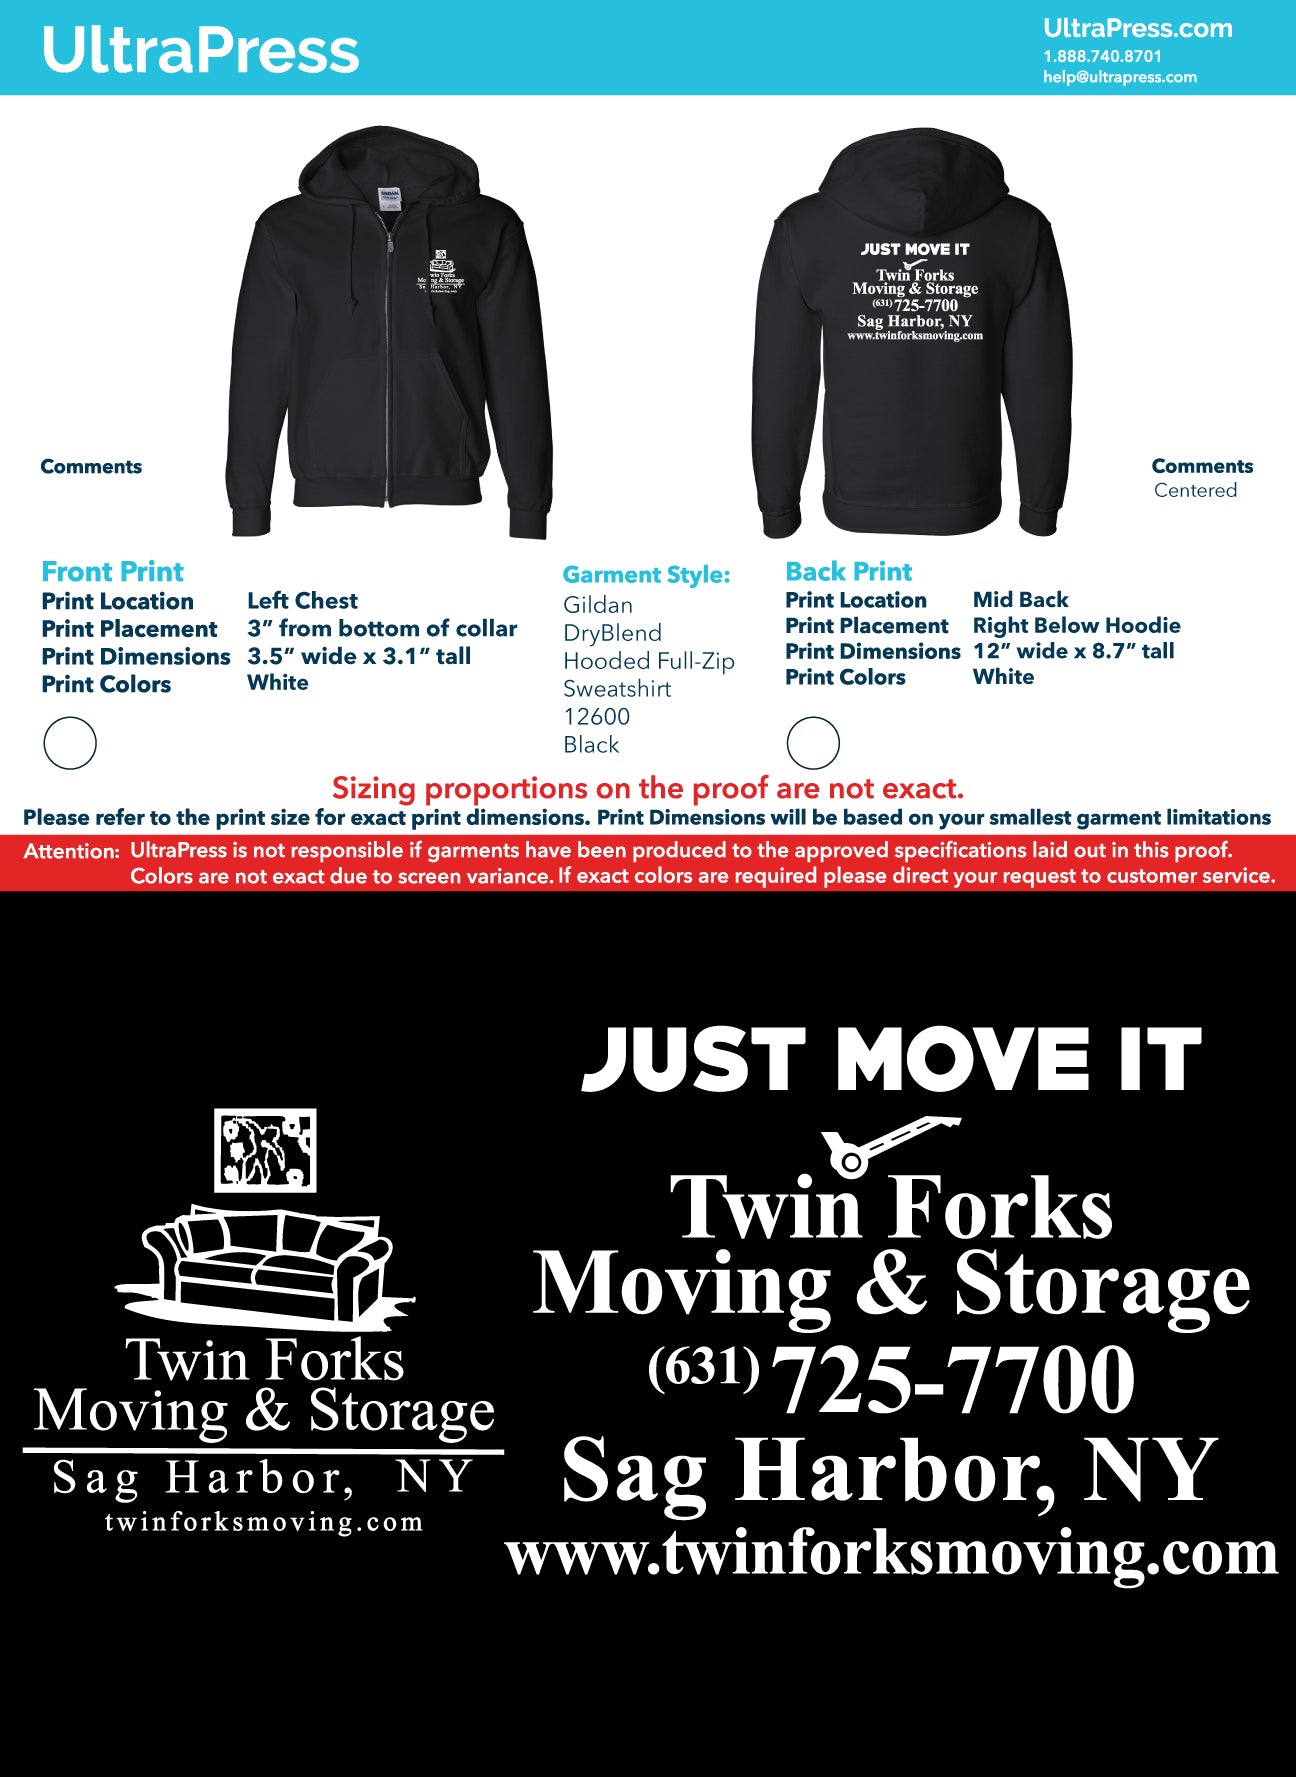 Twin Forks Moving - LS and Fleece Link